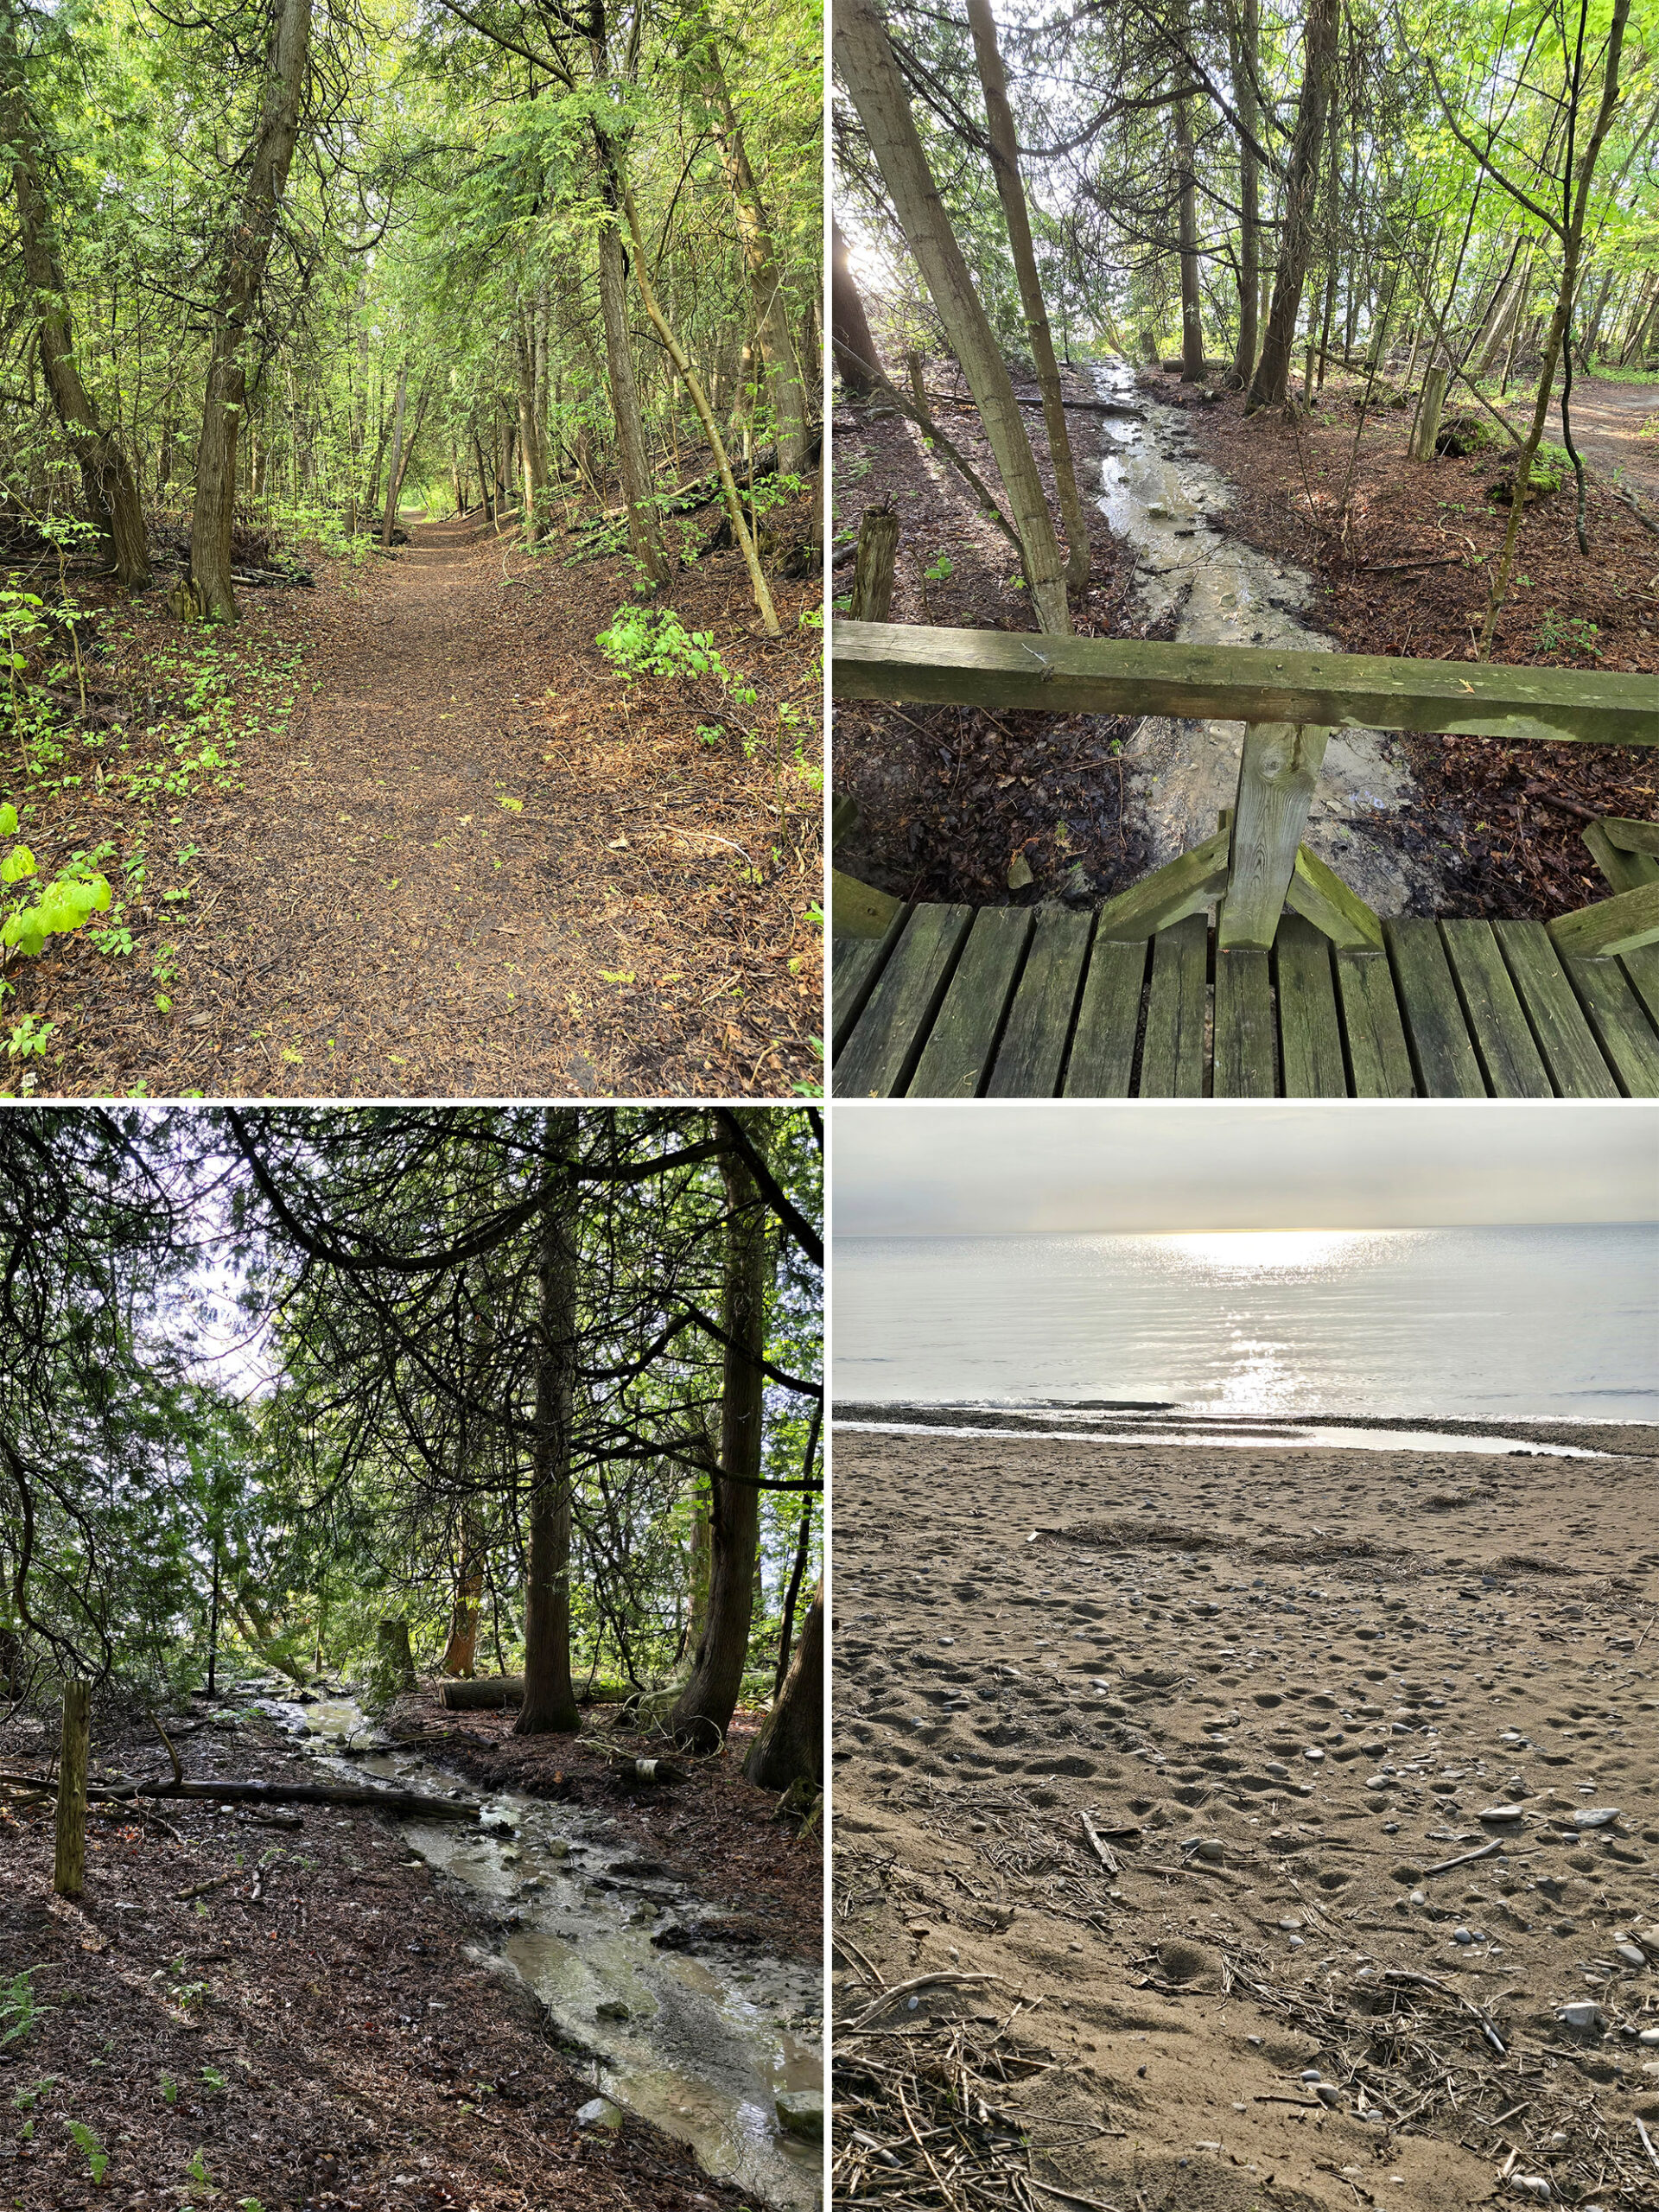 4 part image showing various views from the Below the Bluff trail in Point Farms Provincial Park.